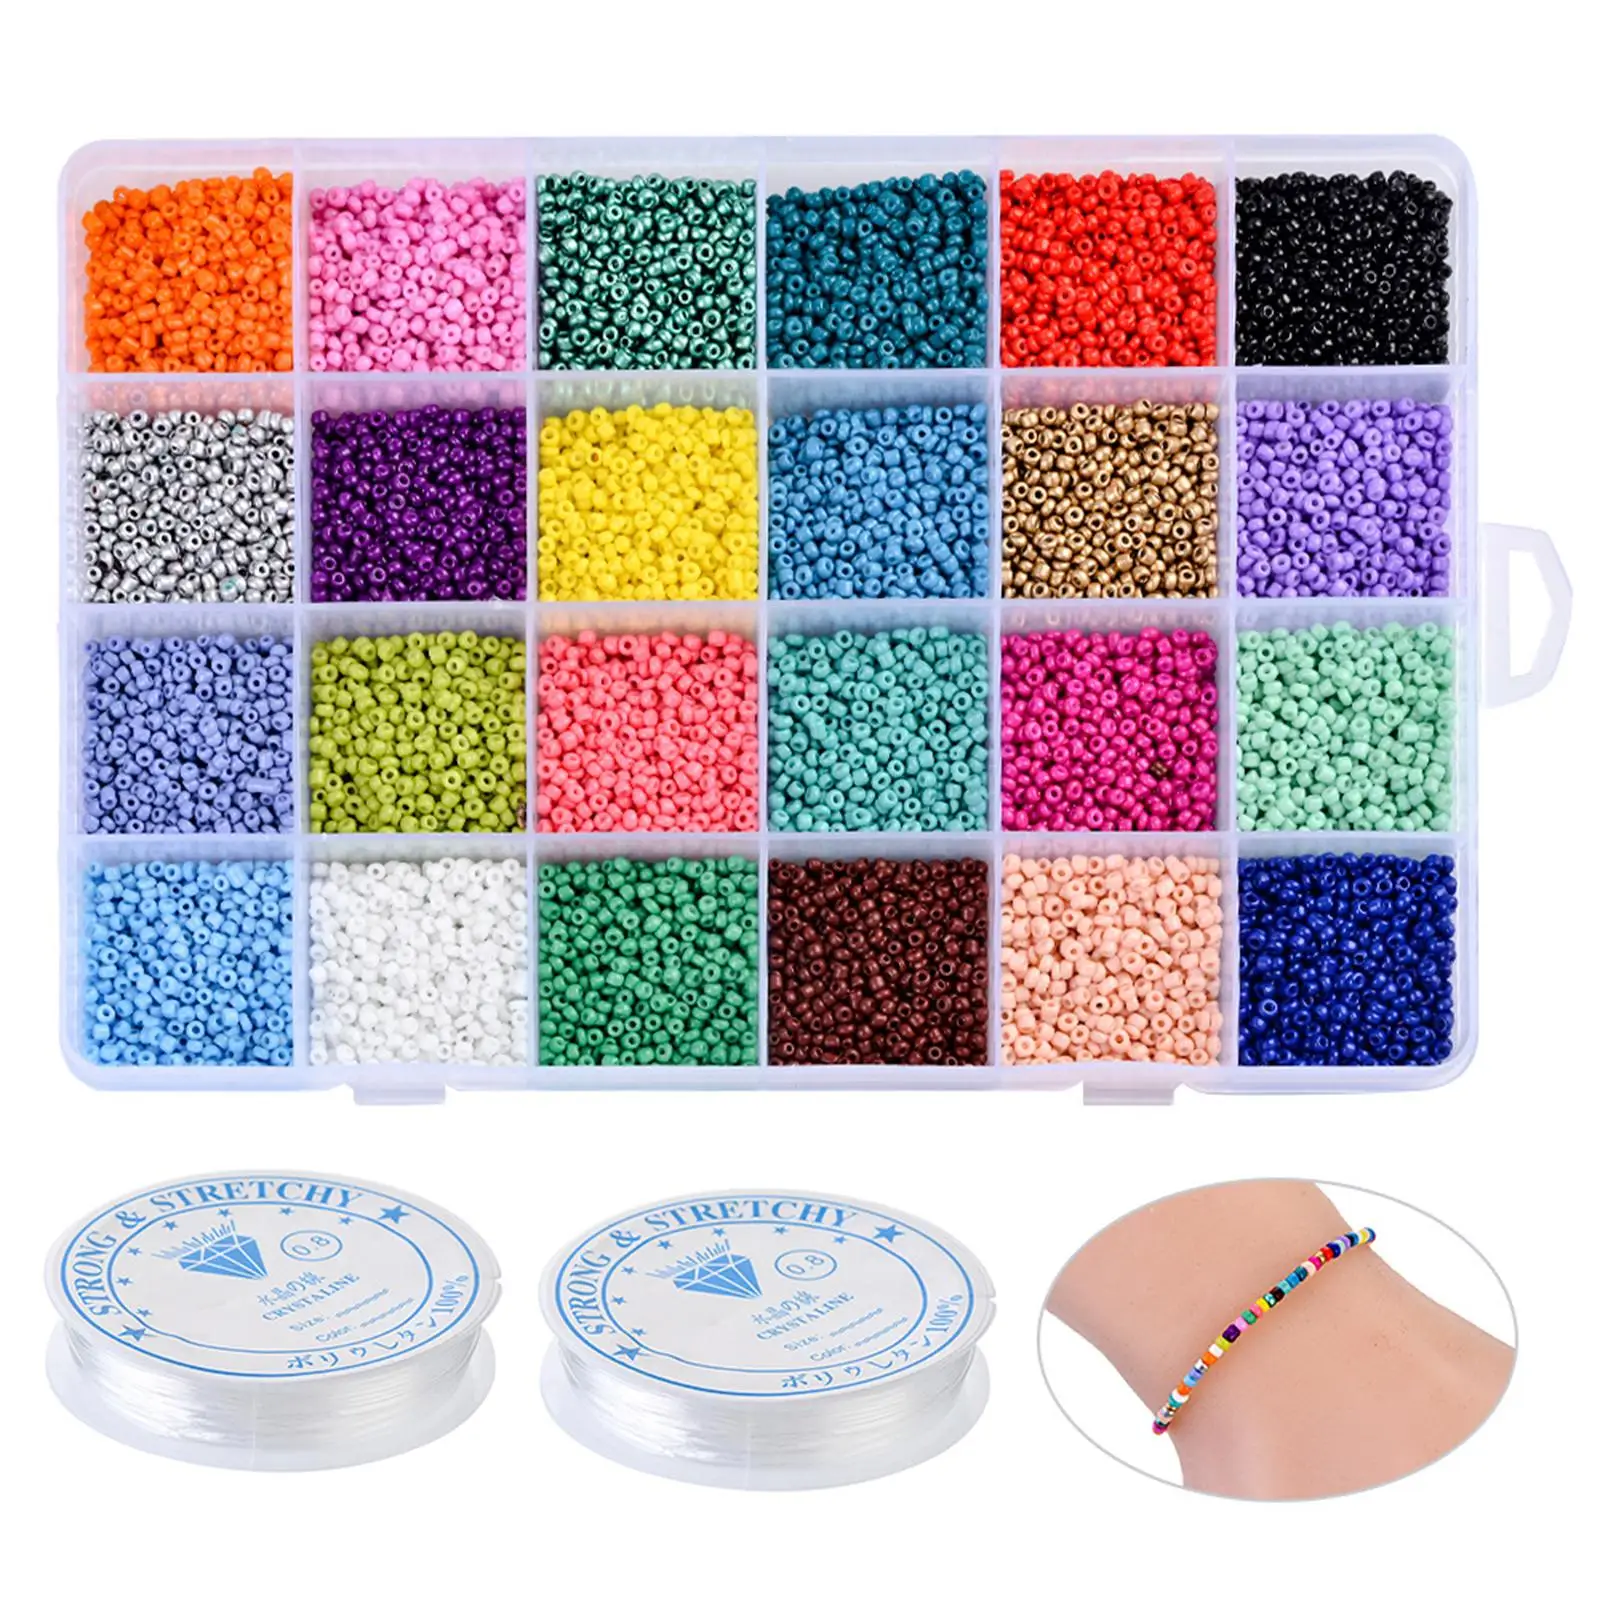 9600 Pieces 2mm Seed Beads Jewelry Making Colorful Opaque Matte Handmade Rainbow Beads for Bracelet DIY Key Chain Assortment